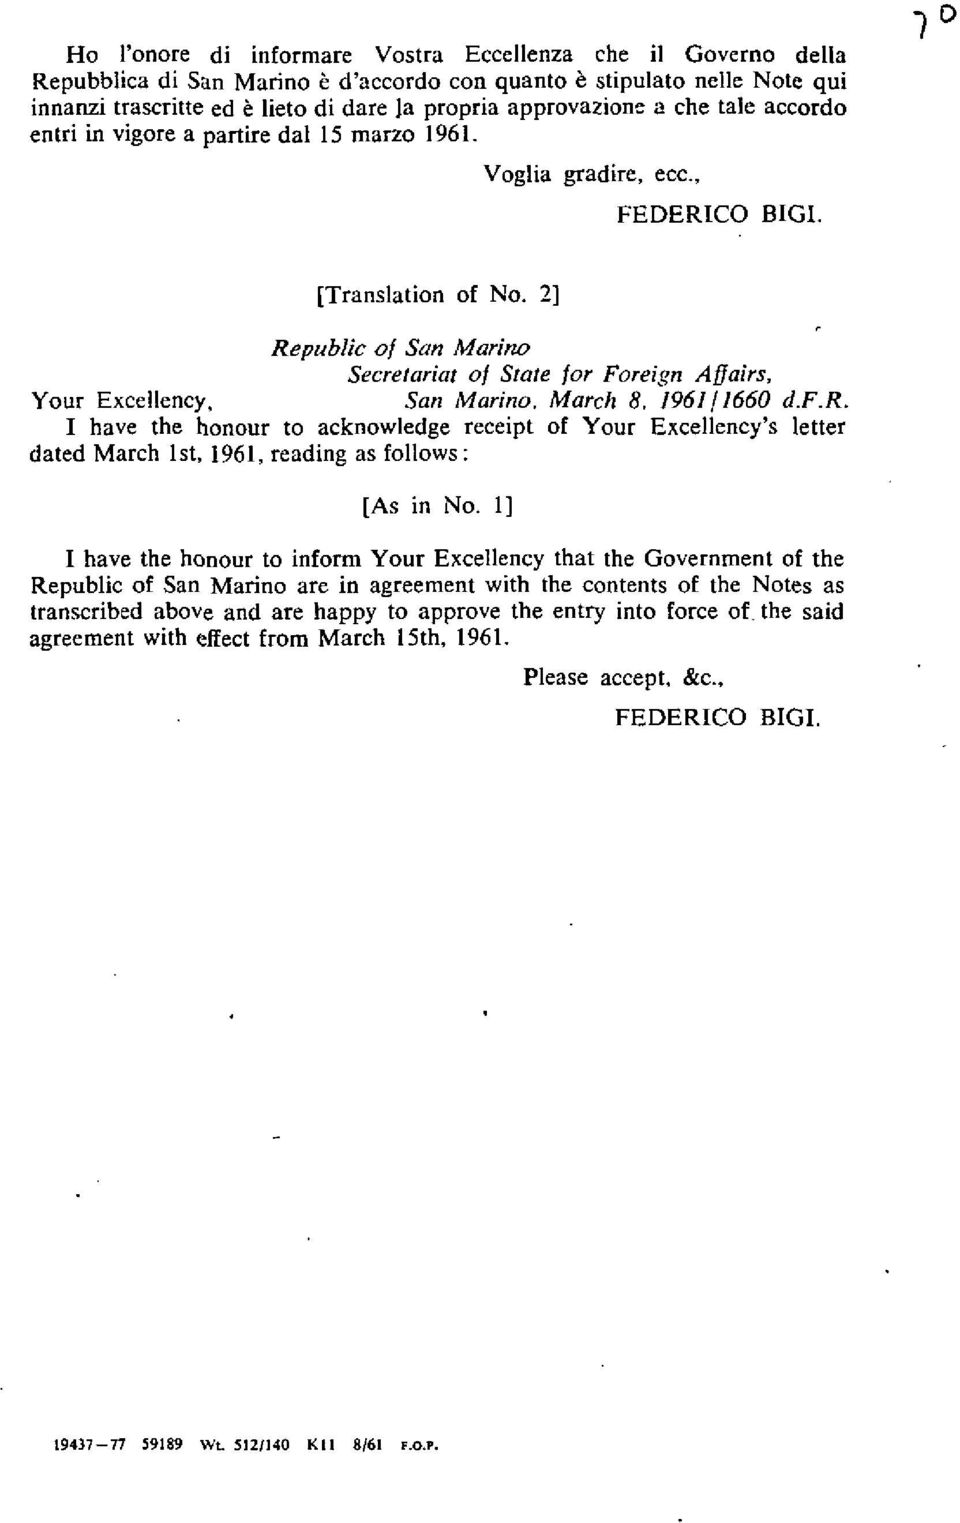 2] Republic of San Marino Secretariat of State for Foreign A$airs, Your Excellency, San Marino. March 8, 1961/1660 d.f.r. I have the honour to acknowledge receipt of Your Excellency's letter dated March 1st, 1961, reading as follows: [As in No.